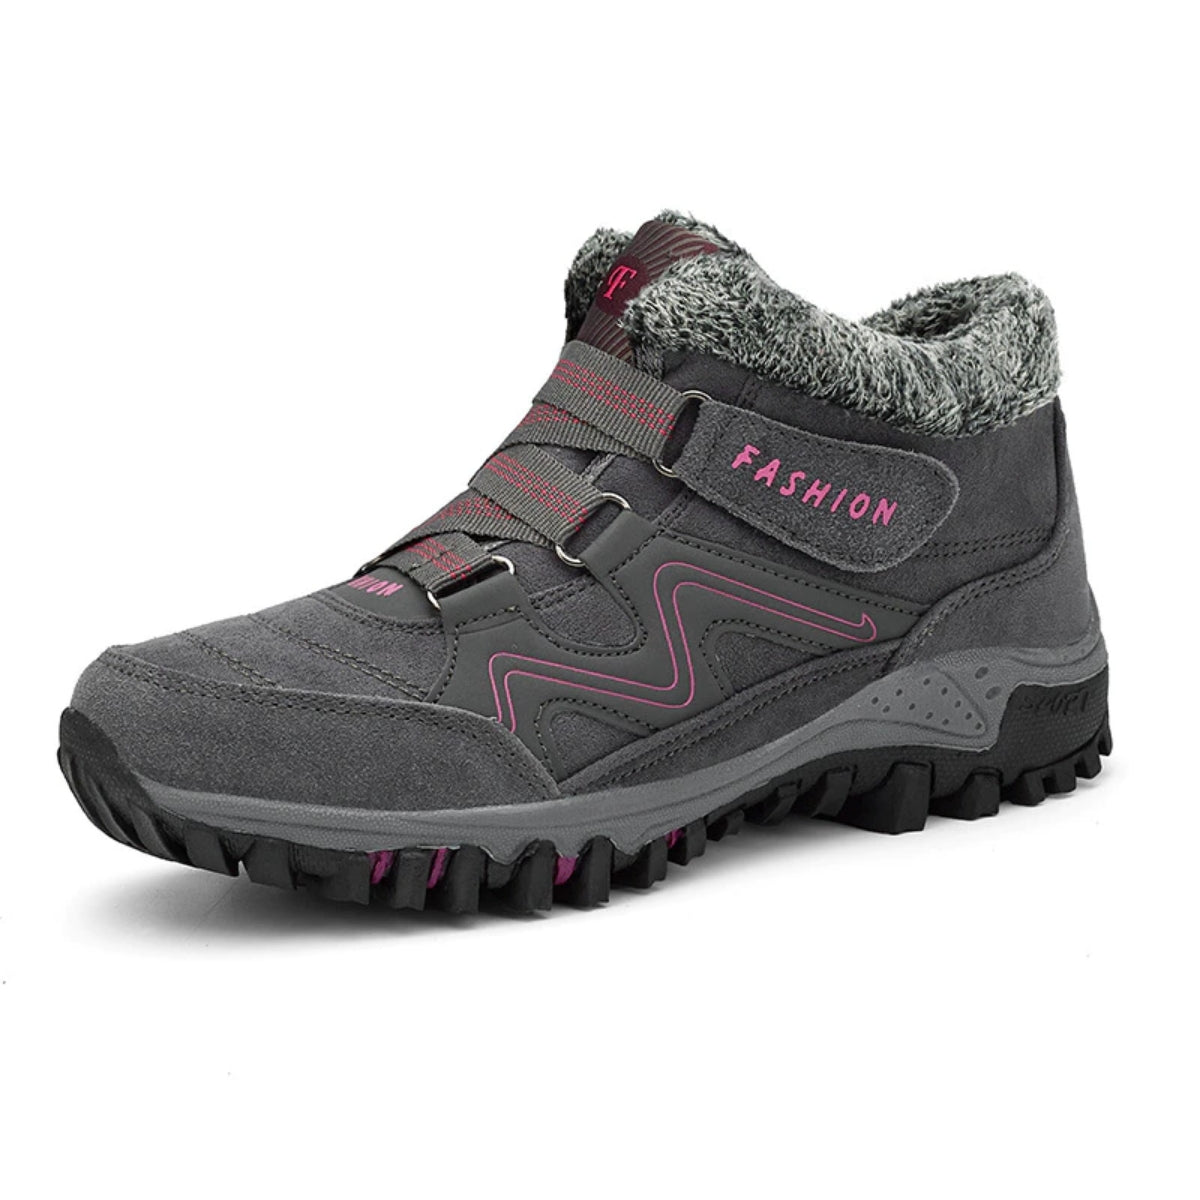 [CYBER MONDAY SPECIAL] Orthofit Winter Pain Relief Footwear